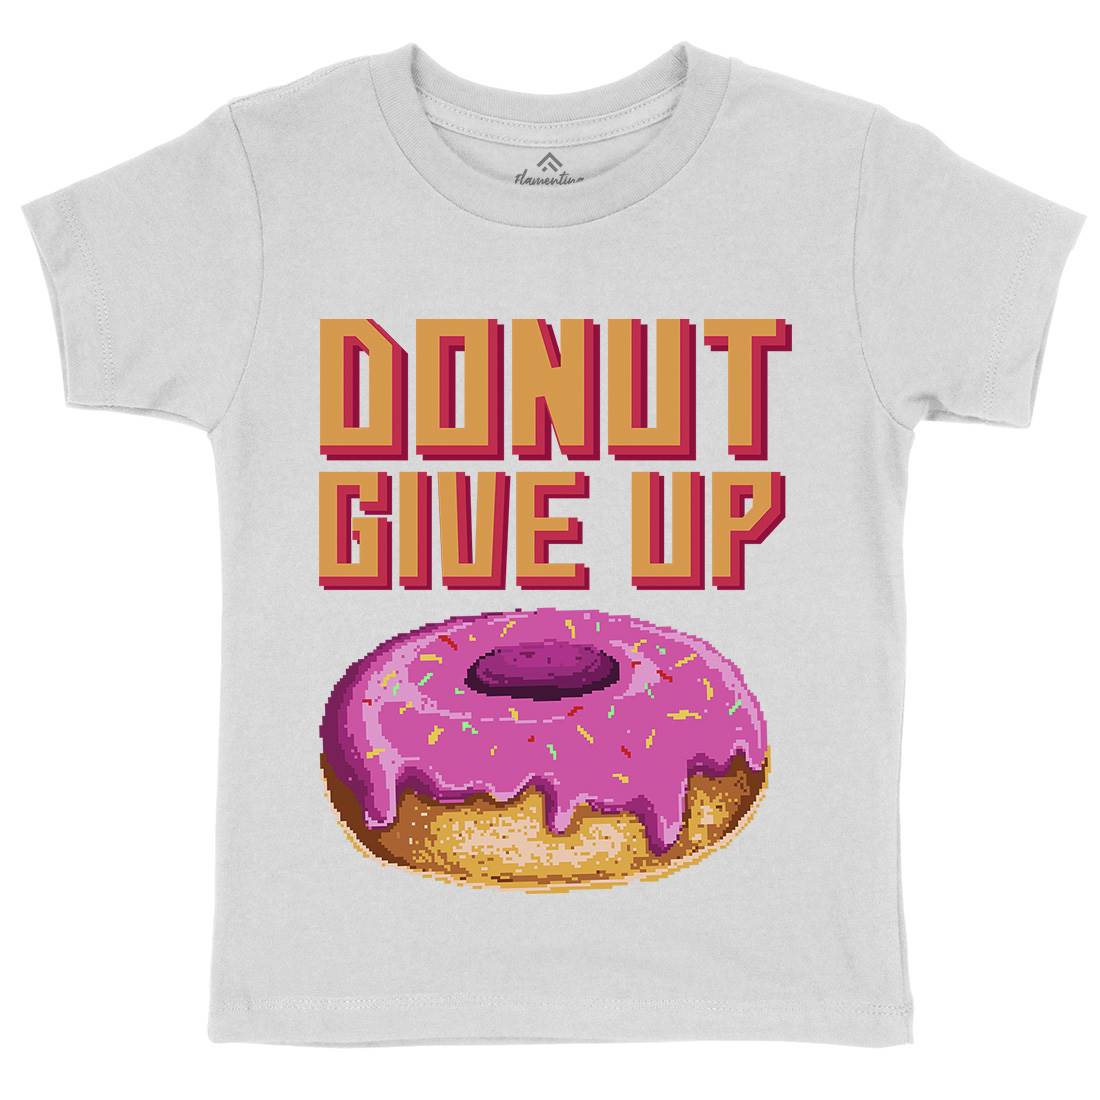 Donut Give Up Kids Crew Neck T-Shirt Food B895